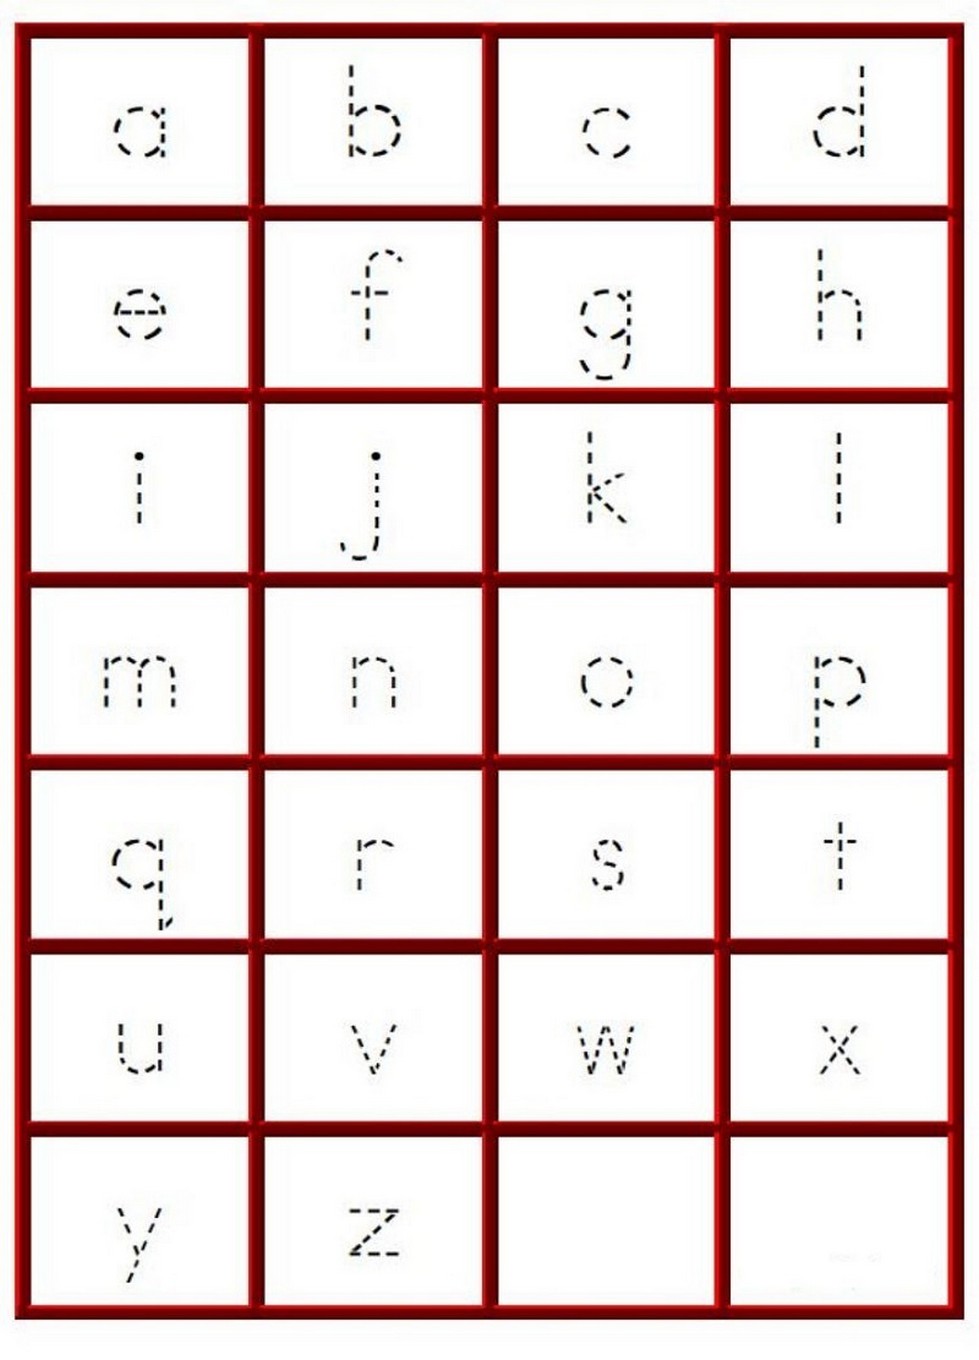 tracing-letters-a-z-worksheets-learning-printable